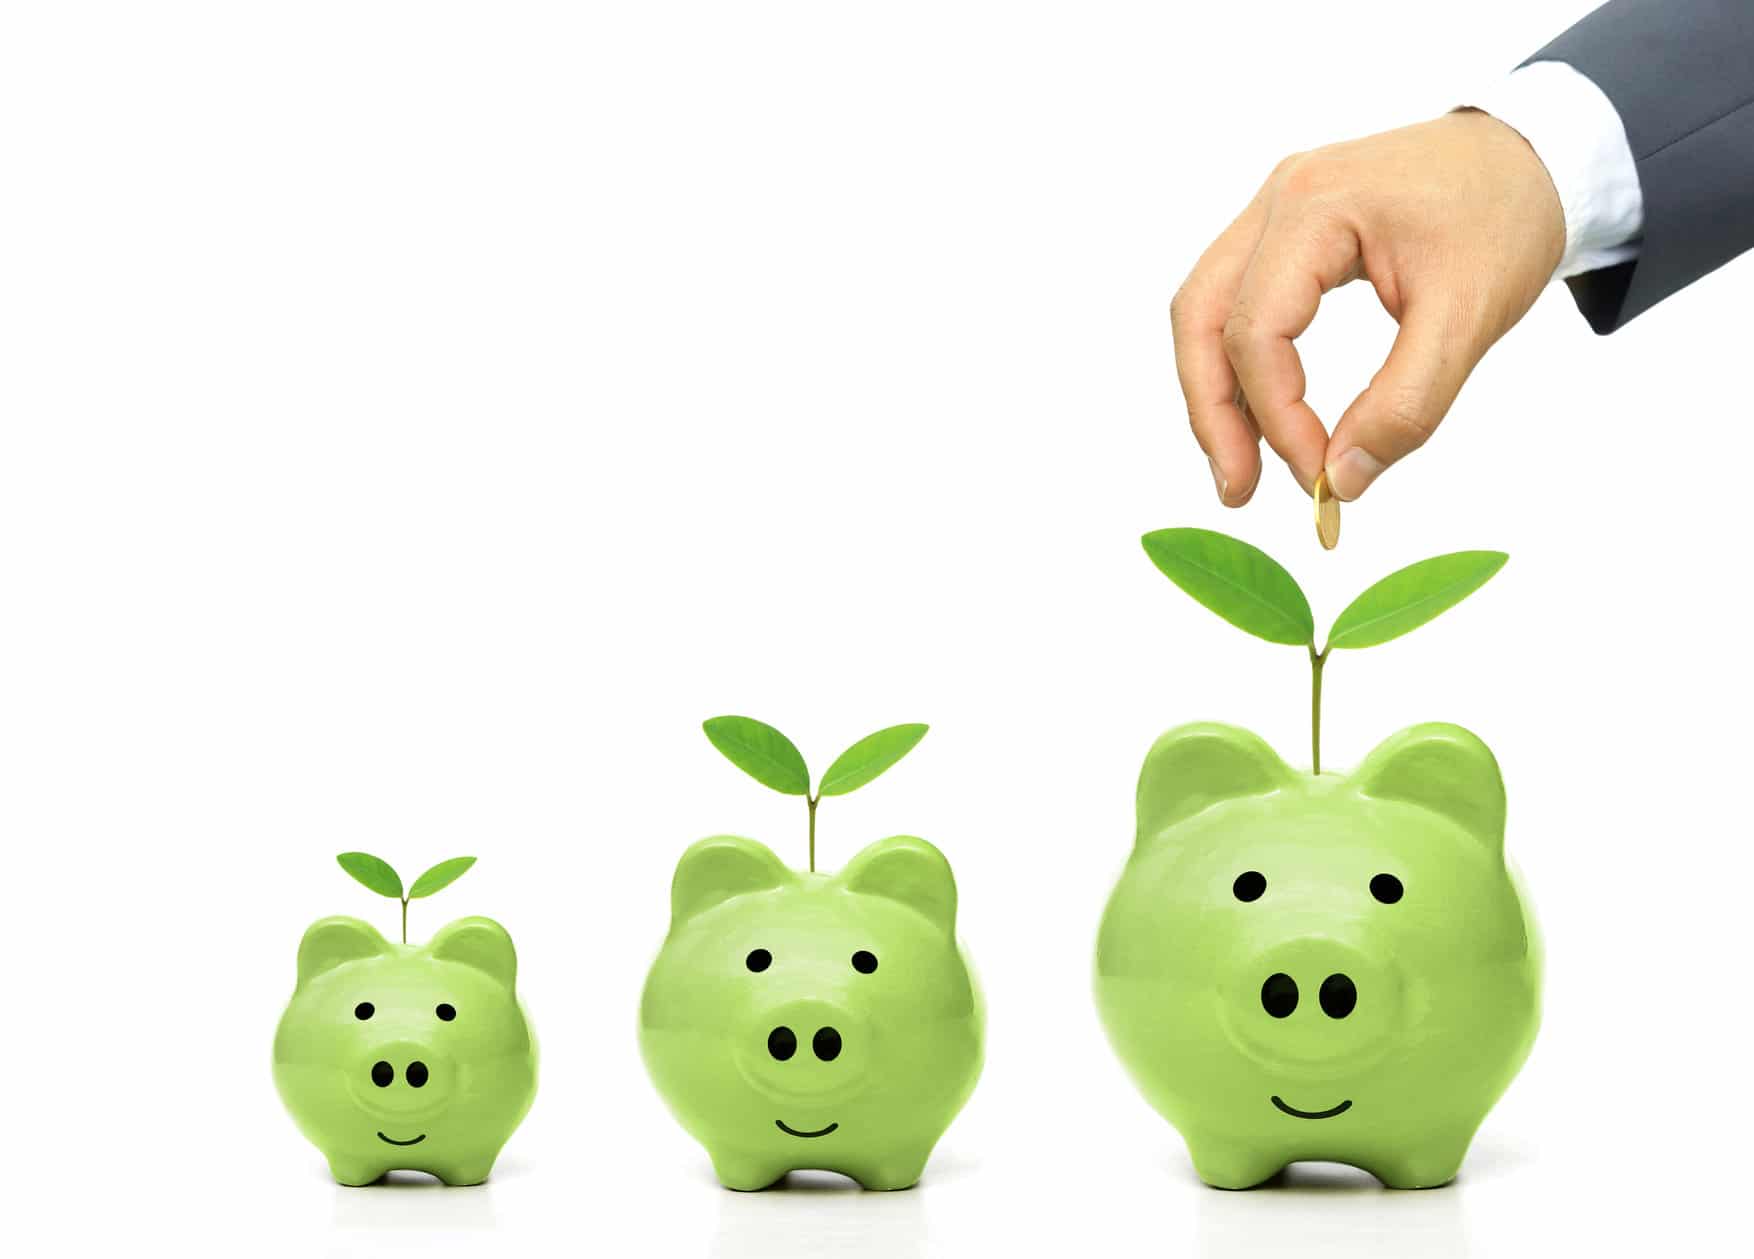 Ethical funds mean you're investing in eco-friendly or people-positive businesses